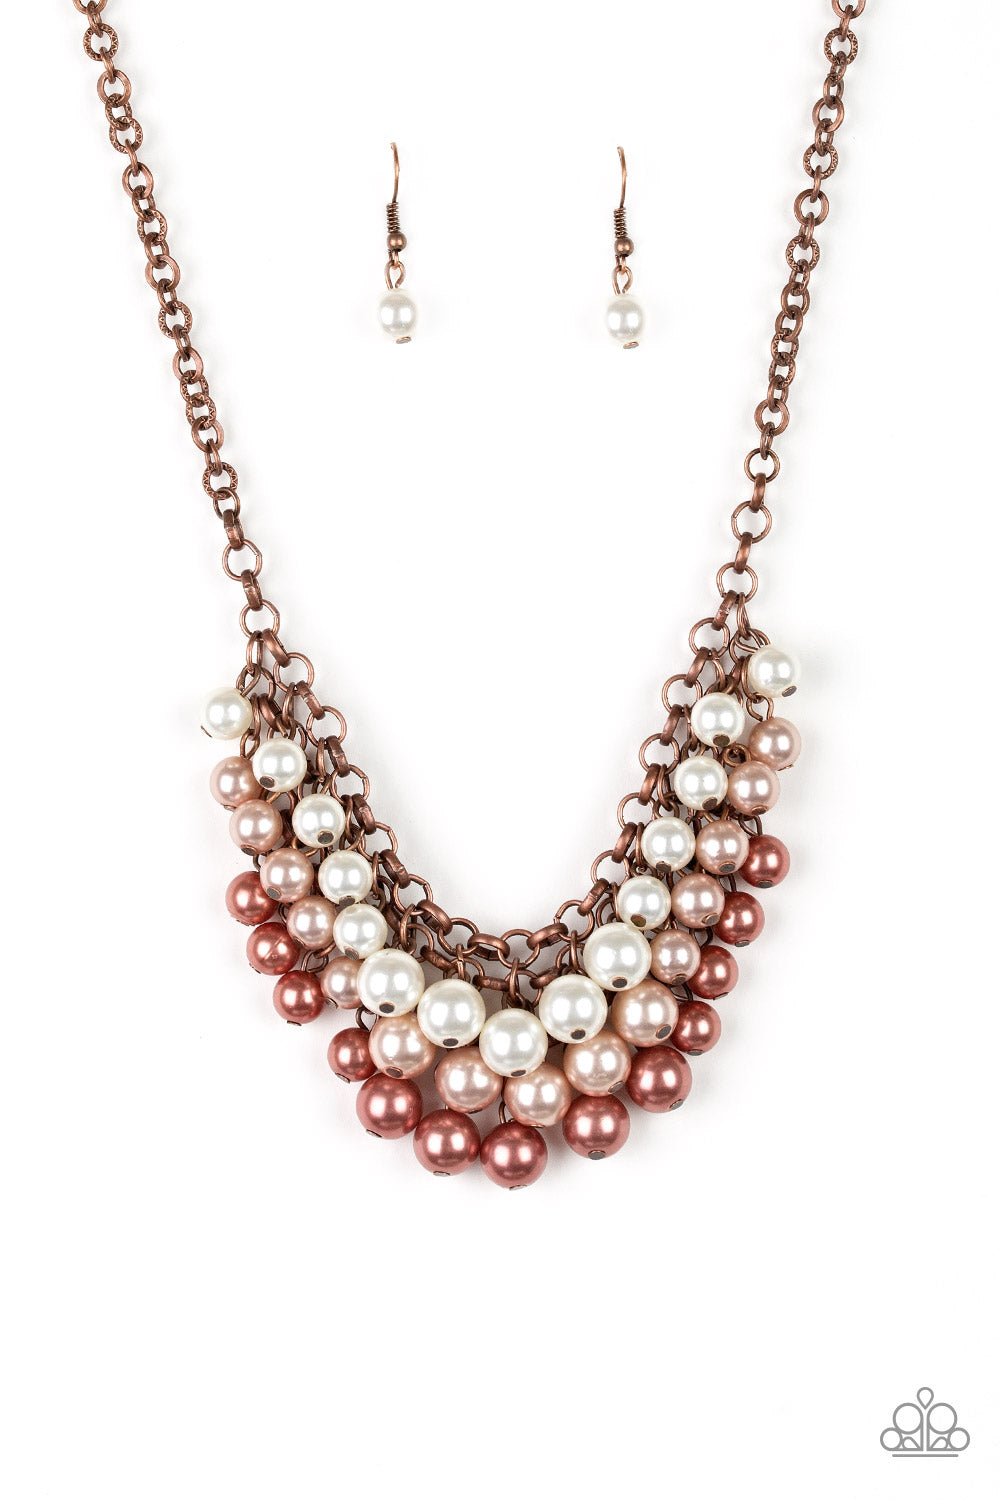 RUN FOR THE HEELS! - COPPER OMBRE PEARLS NECKLACE